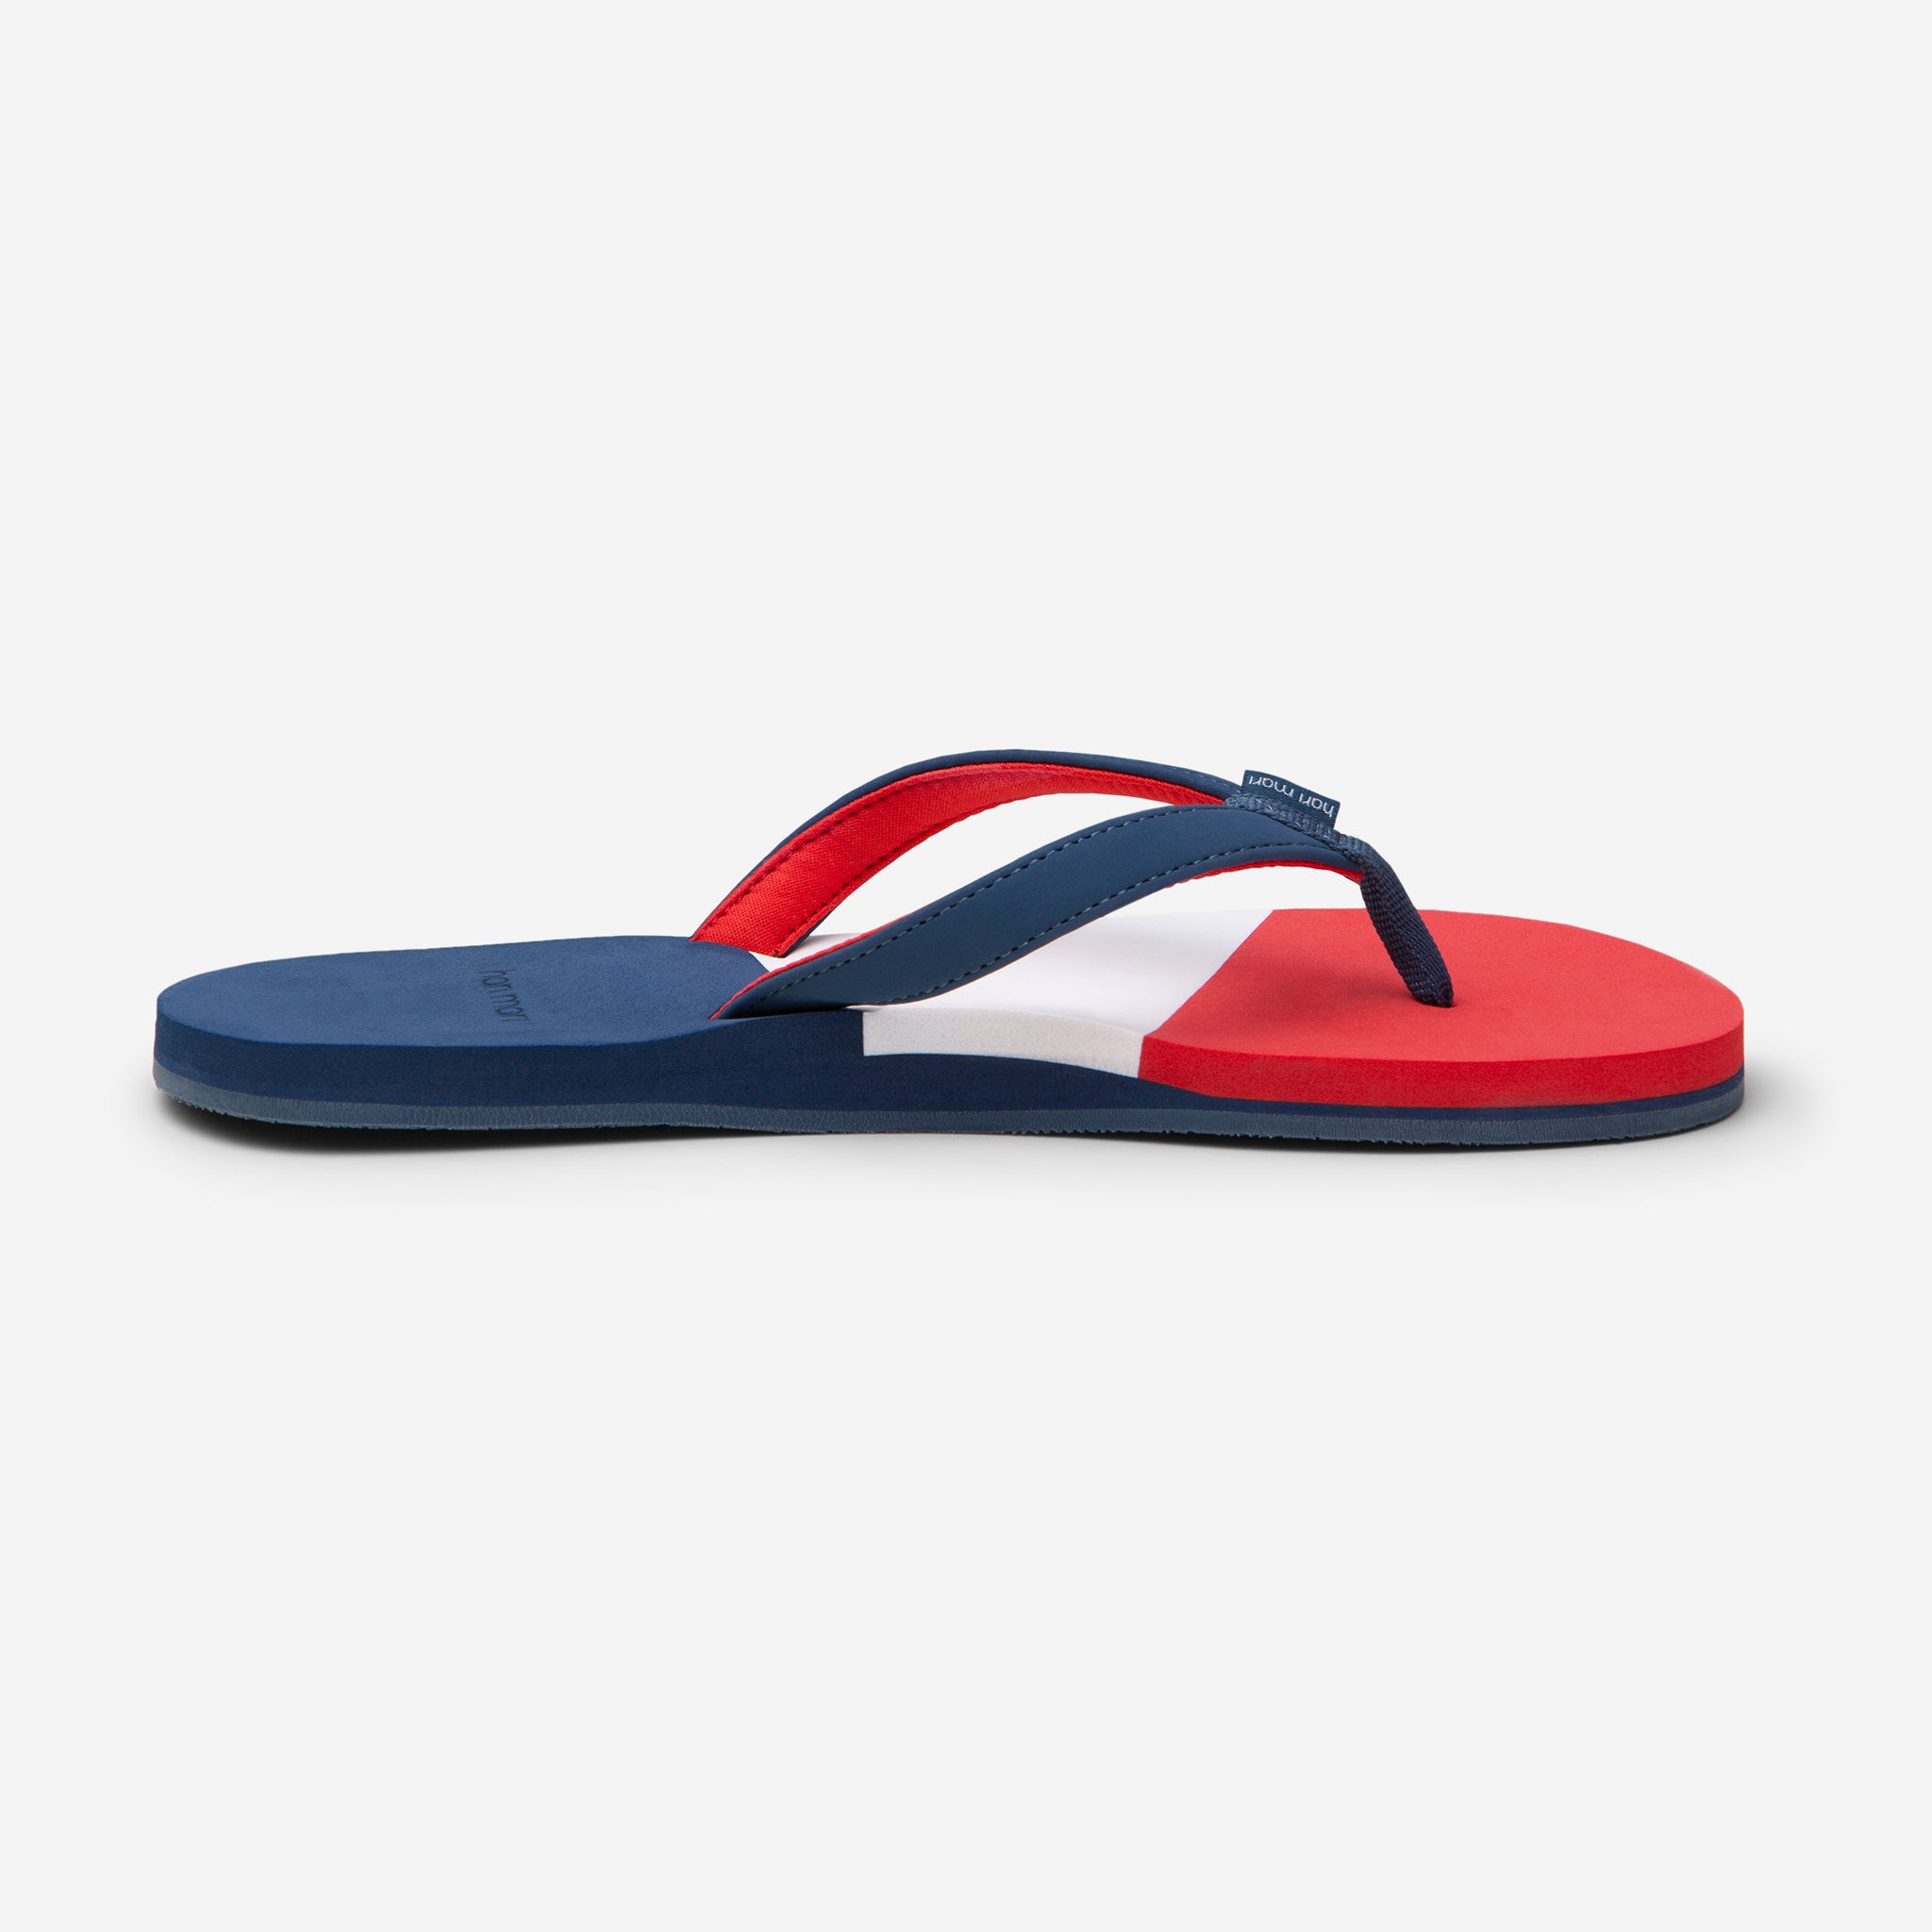 side profile of Hari Mari Women's Meadows Asana Flip Flops in Navy/Red/Lily on white background